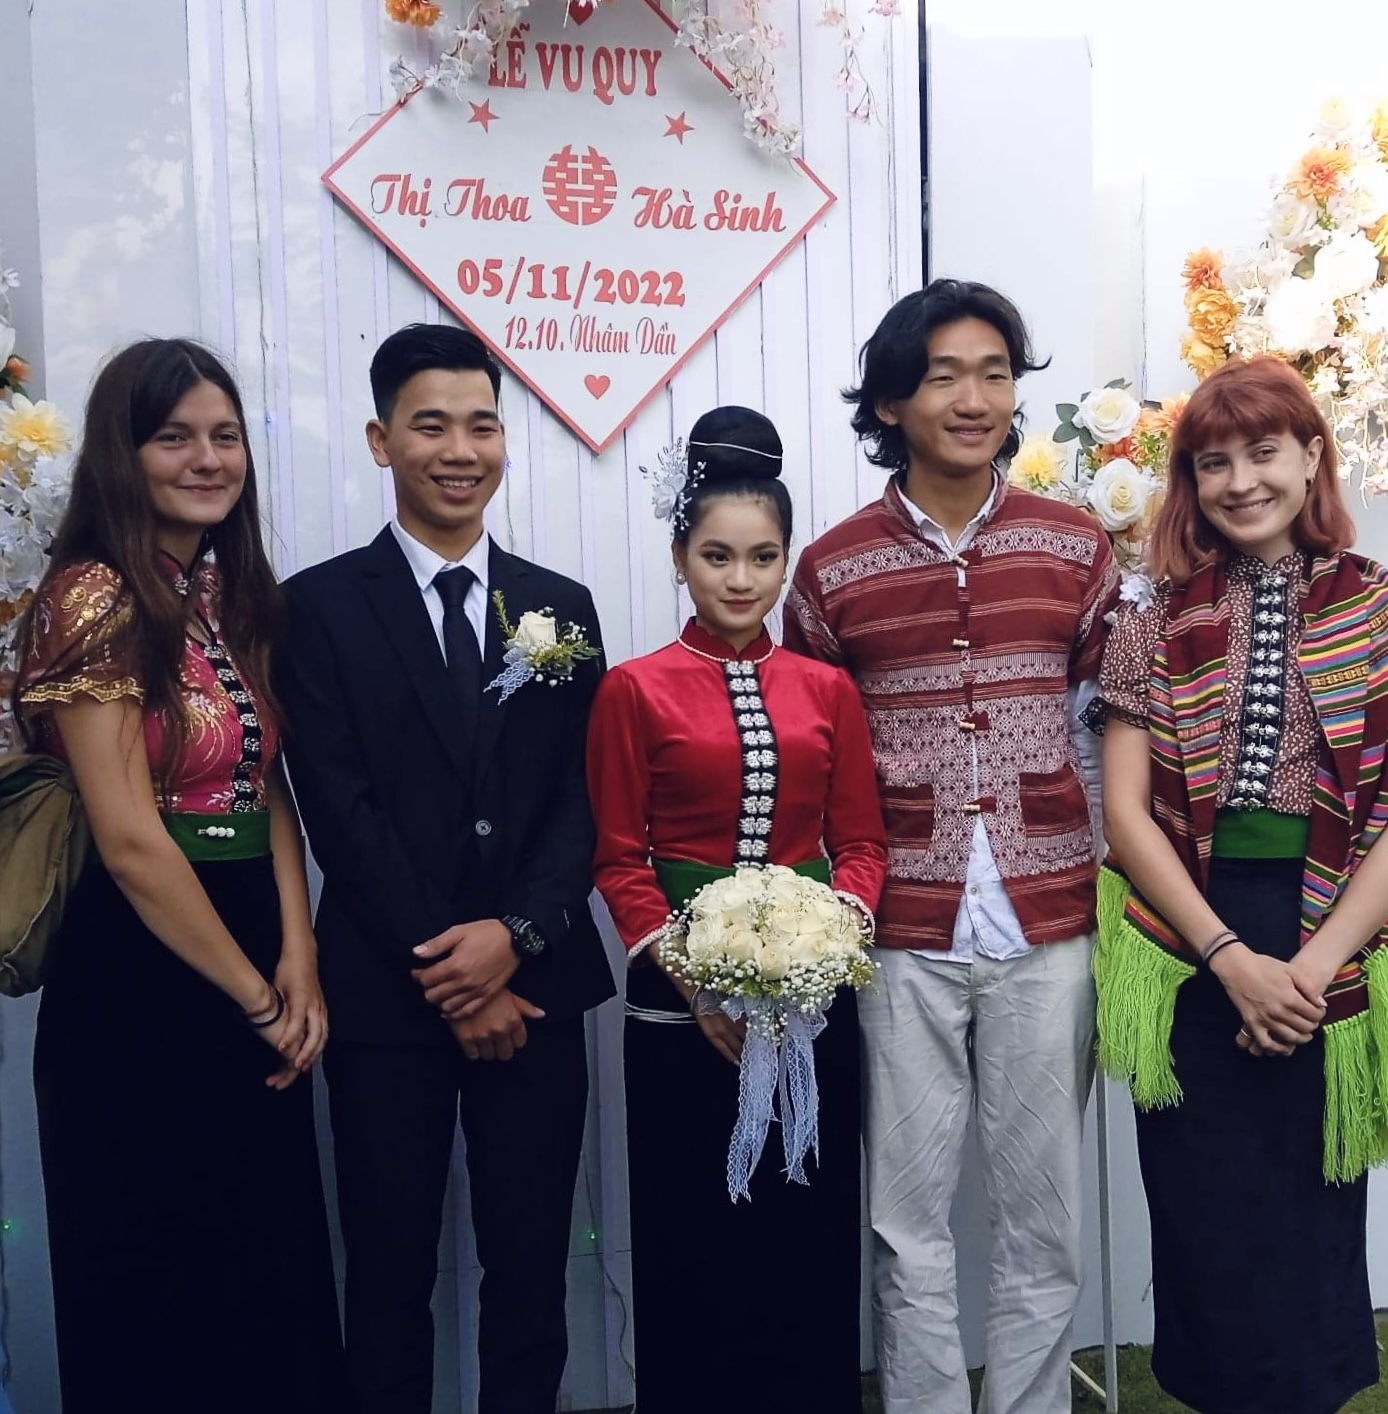 Experience wedding with ethnic people in Tram Tau